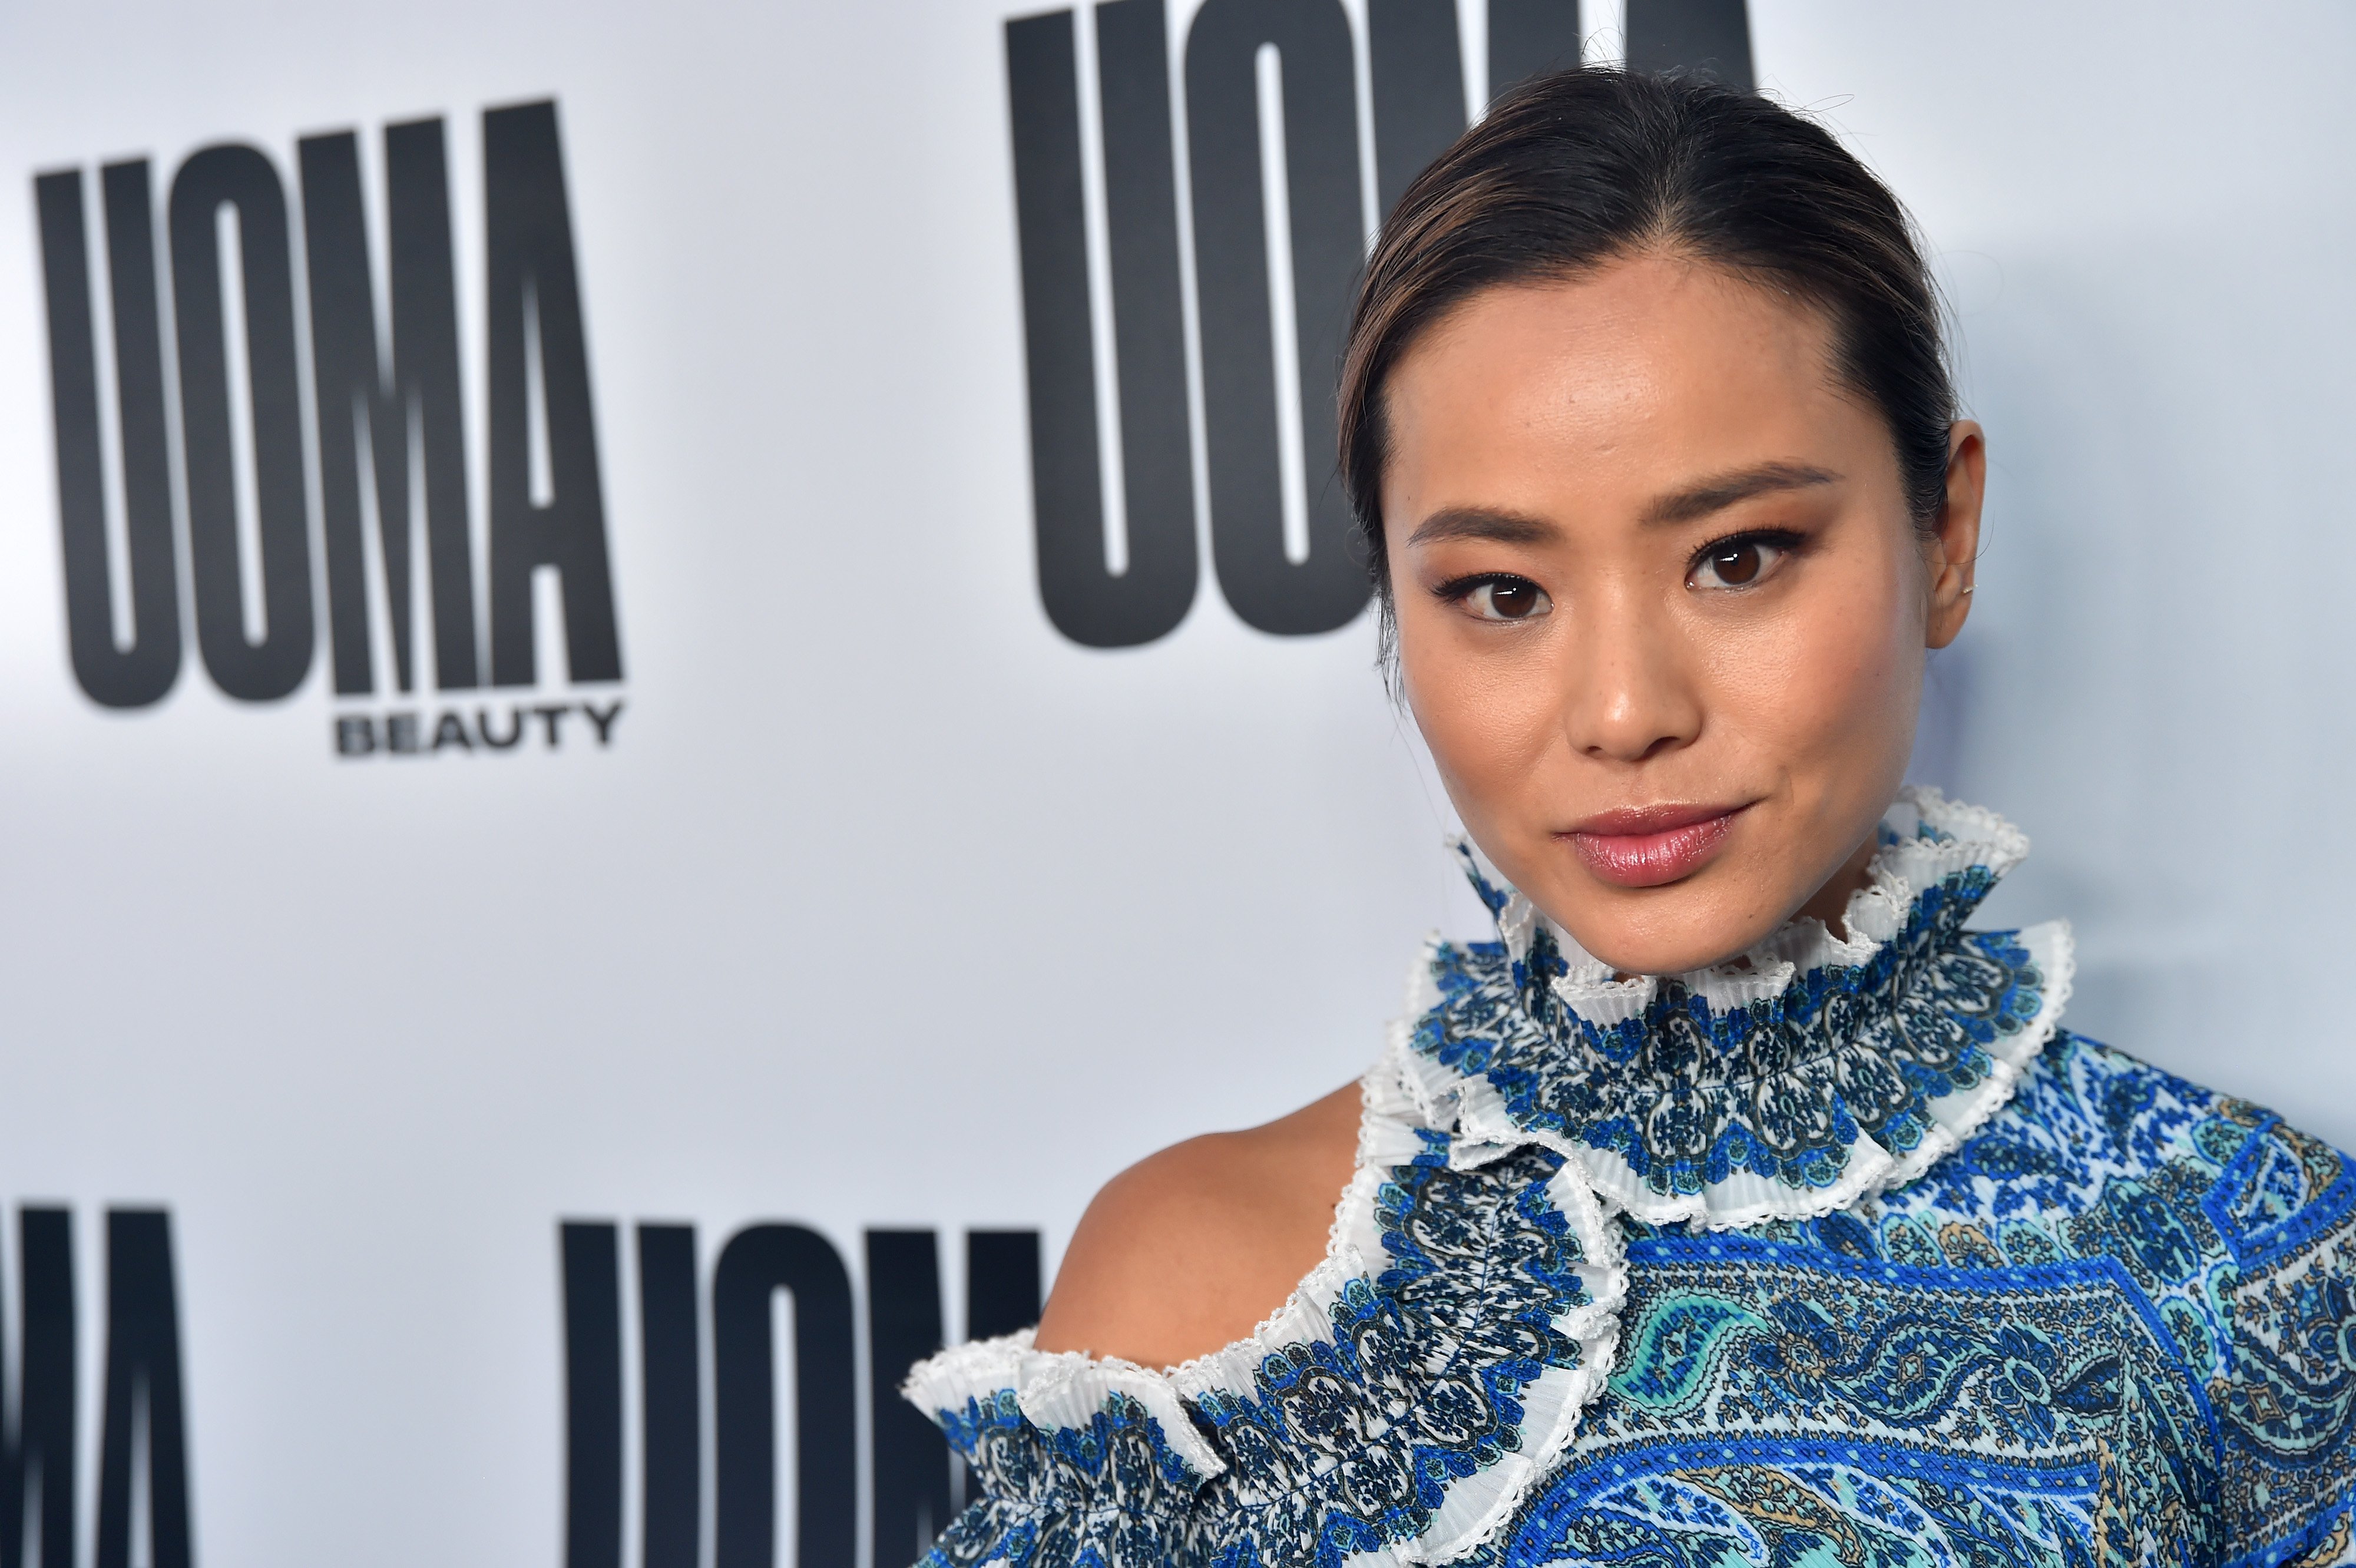 Jamie Chung poses at an event in a blue outfit